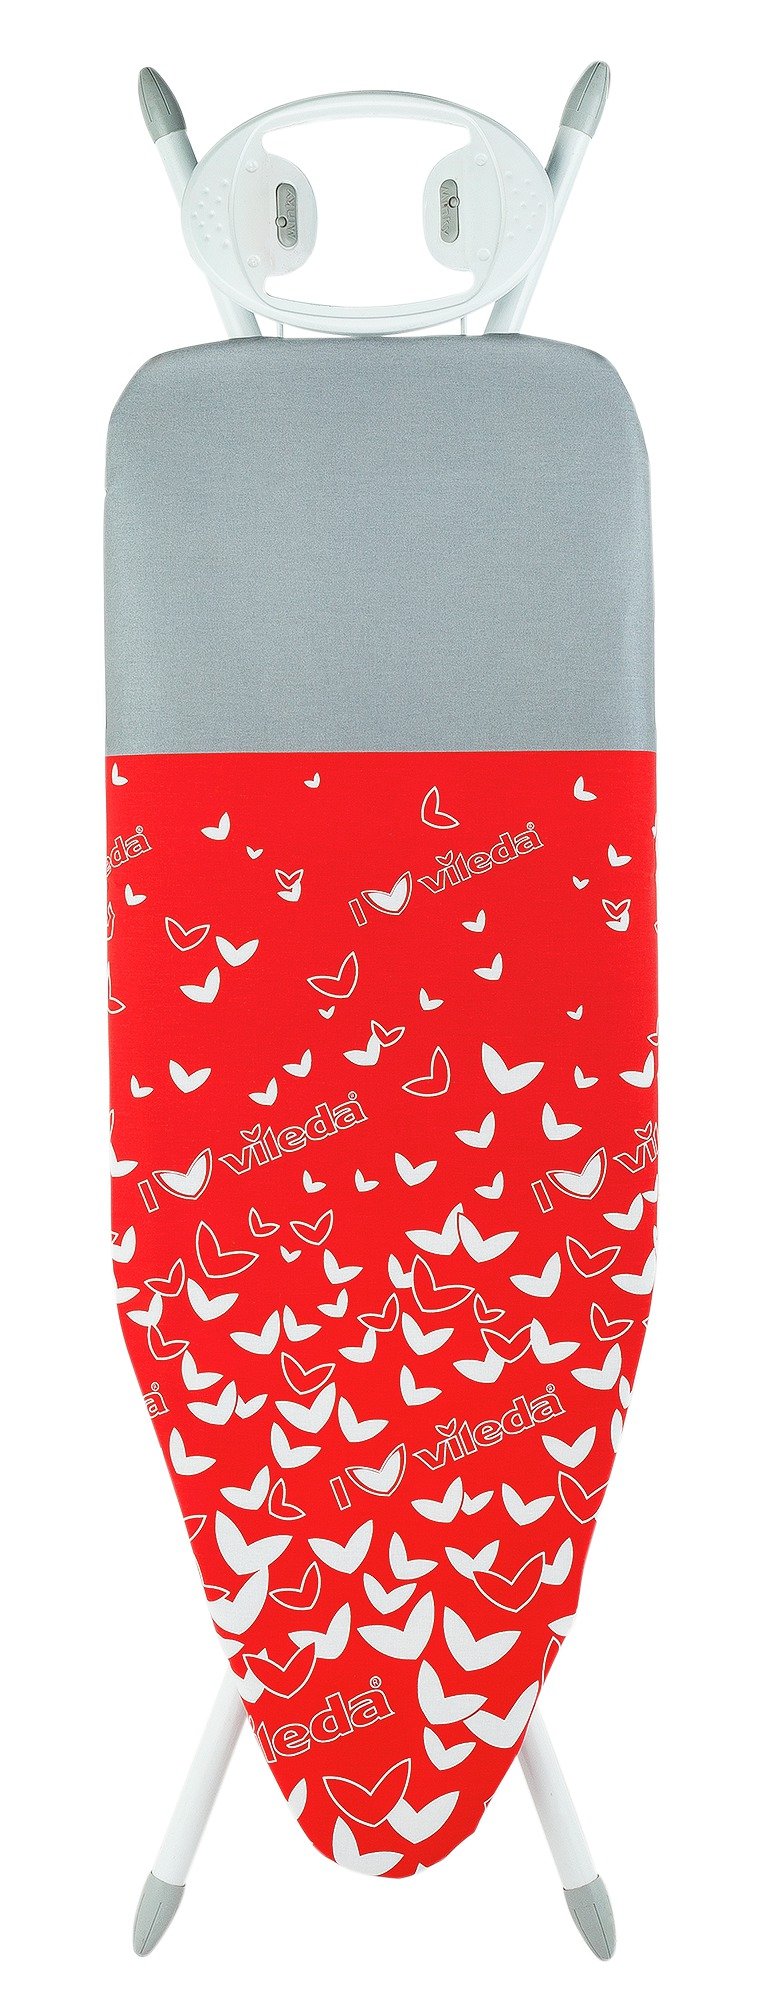 Vileda 130 x 45cm Park & Go Ironing Board Cover - Red